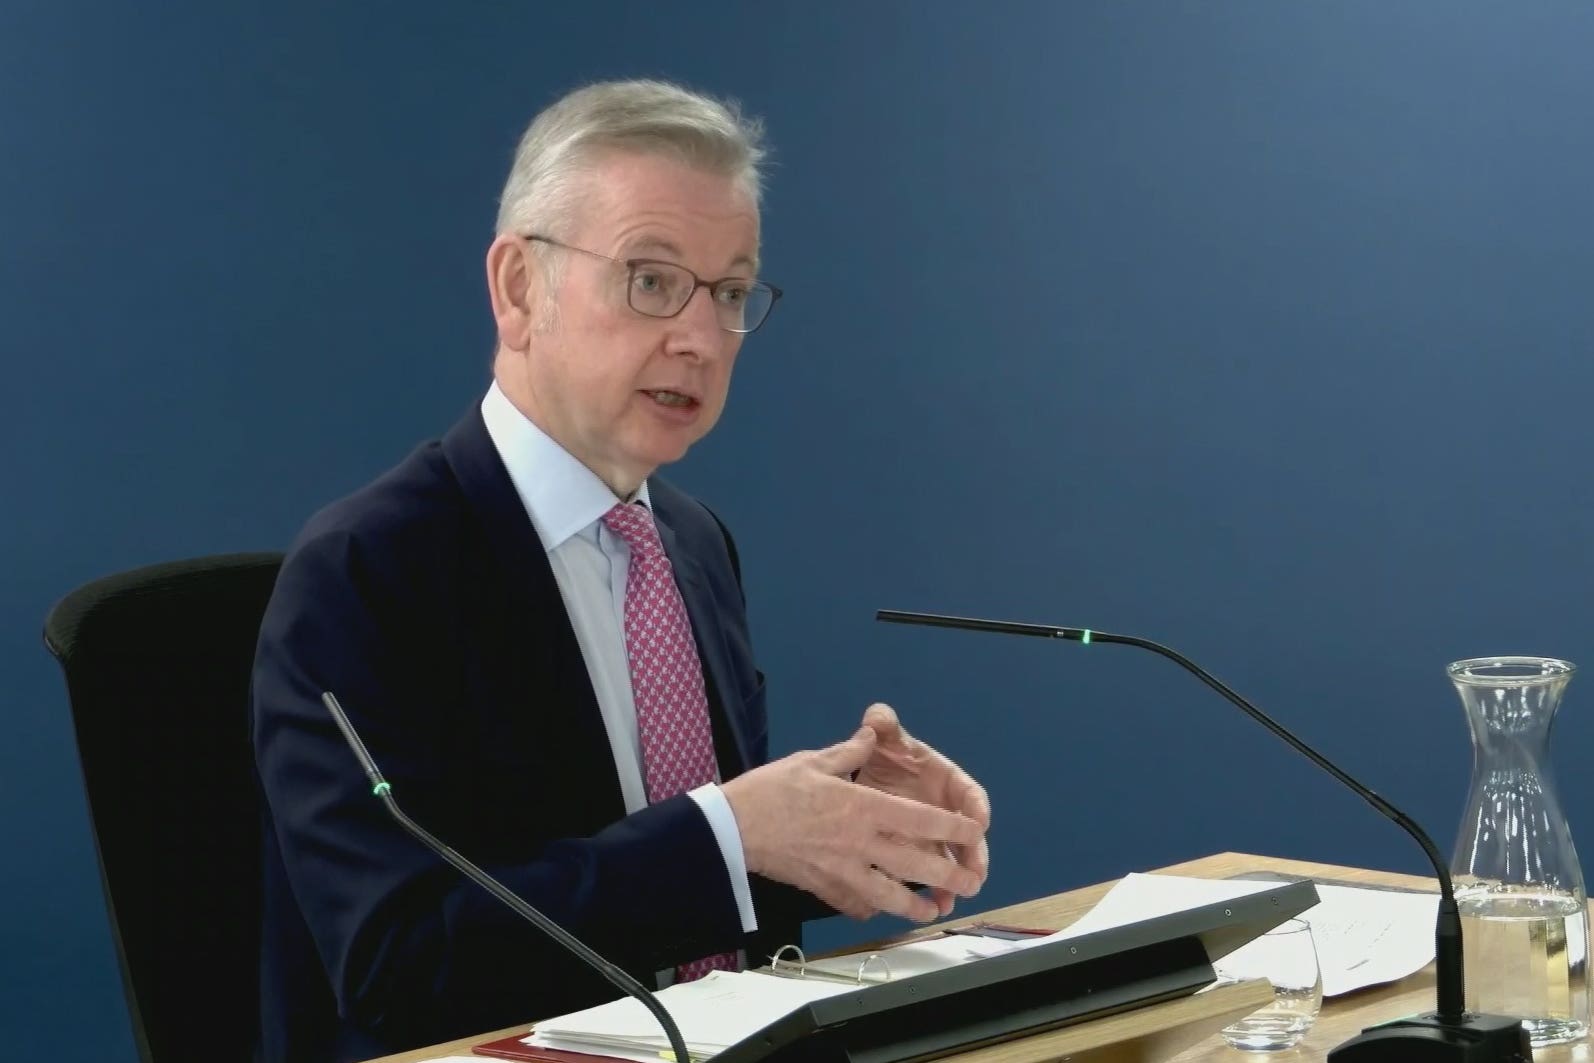 Michael Gove floated the theory at the Covid-19 inquiry that the virus was ‘man-made’